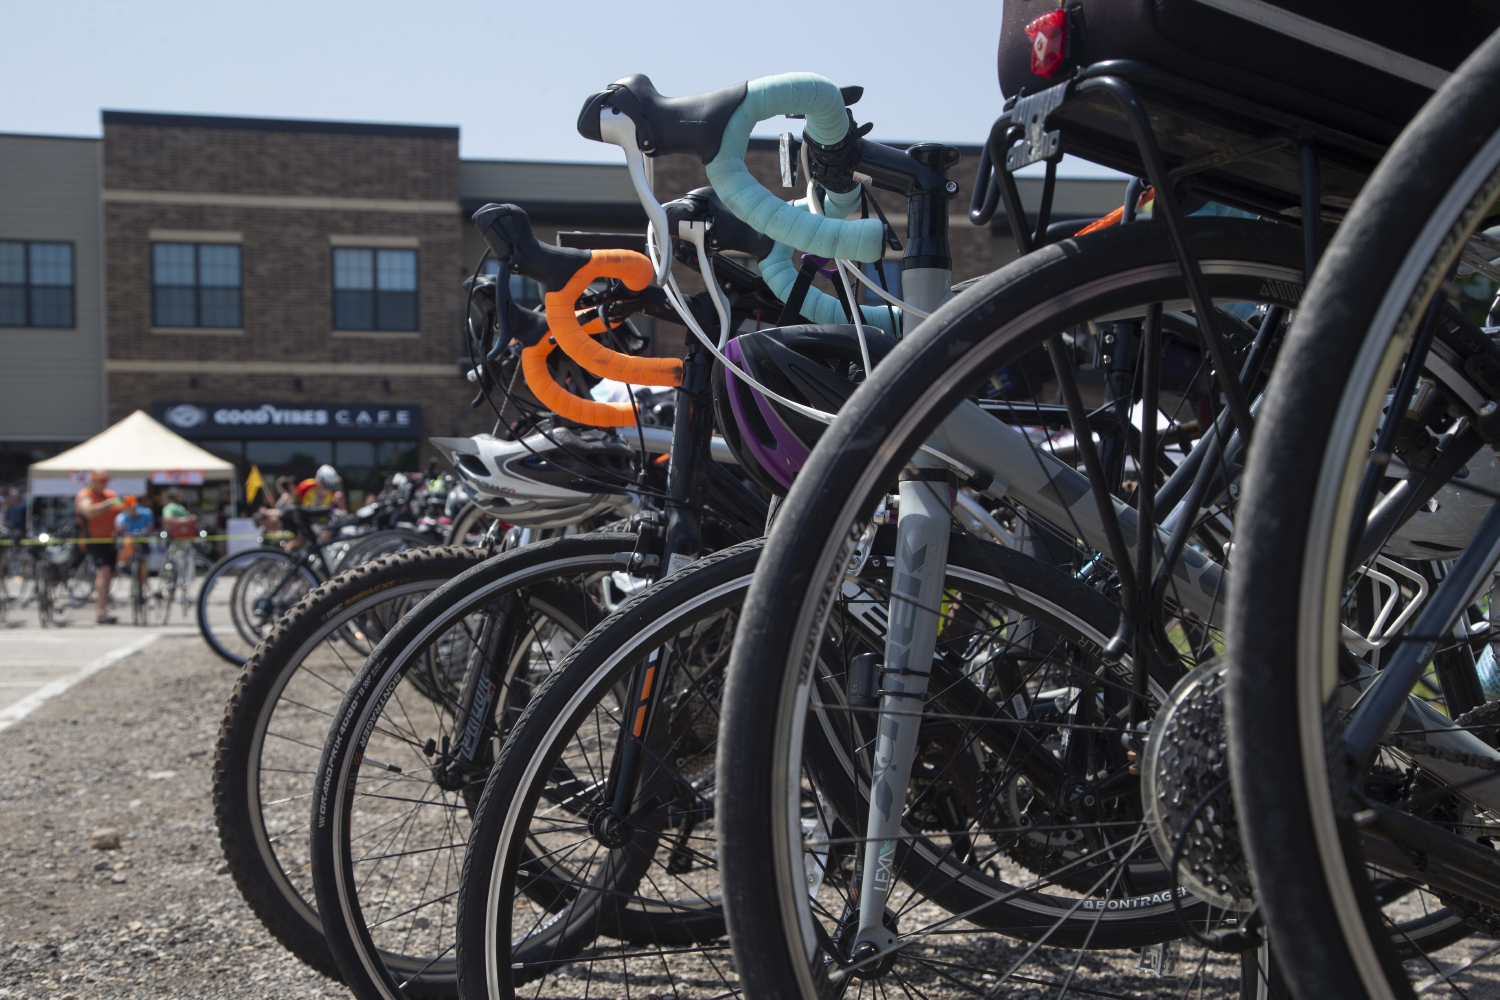 Iowa’s Ride cancels first statewide bike ride The Daily Iowan